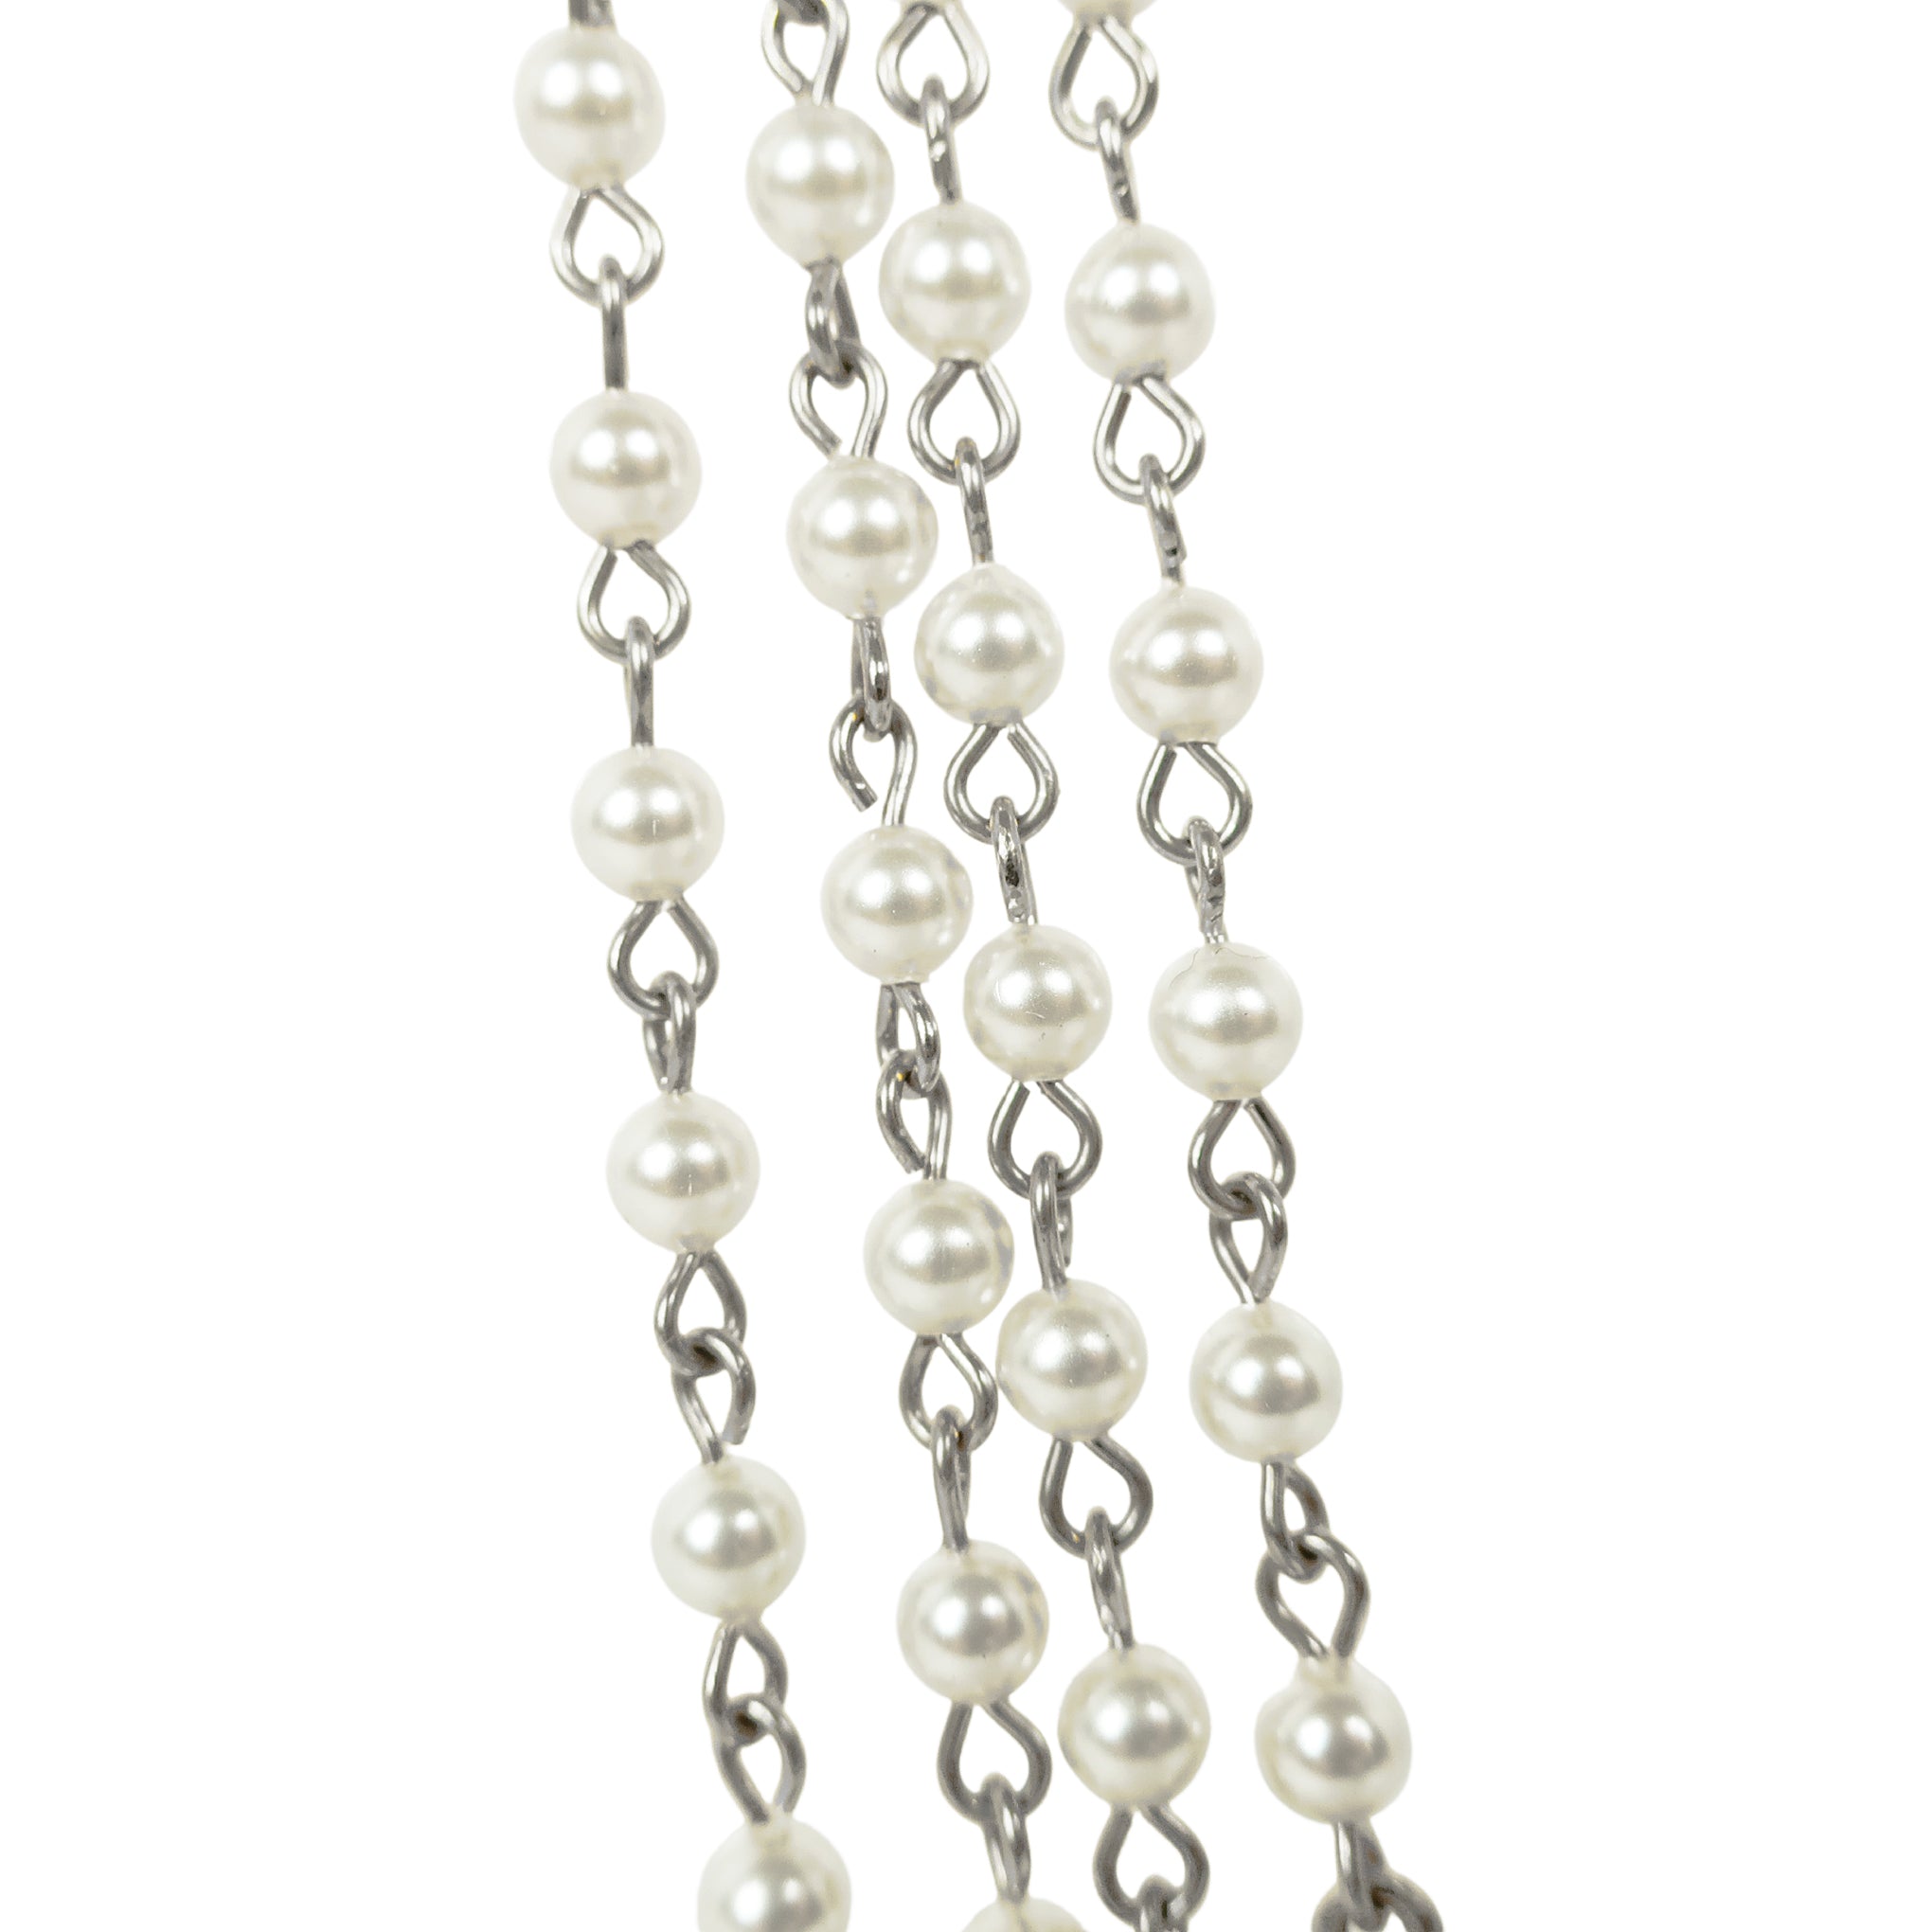 VSA Magdalena Statement Necklace in Silver and 4mm Cream Crystal Pearl Beads